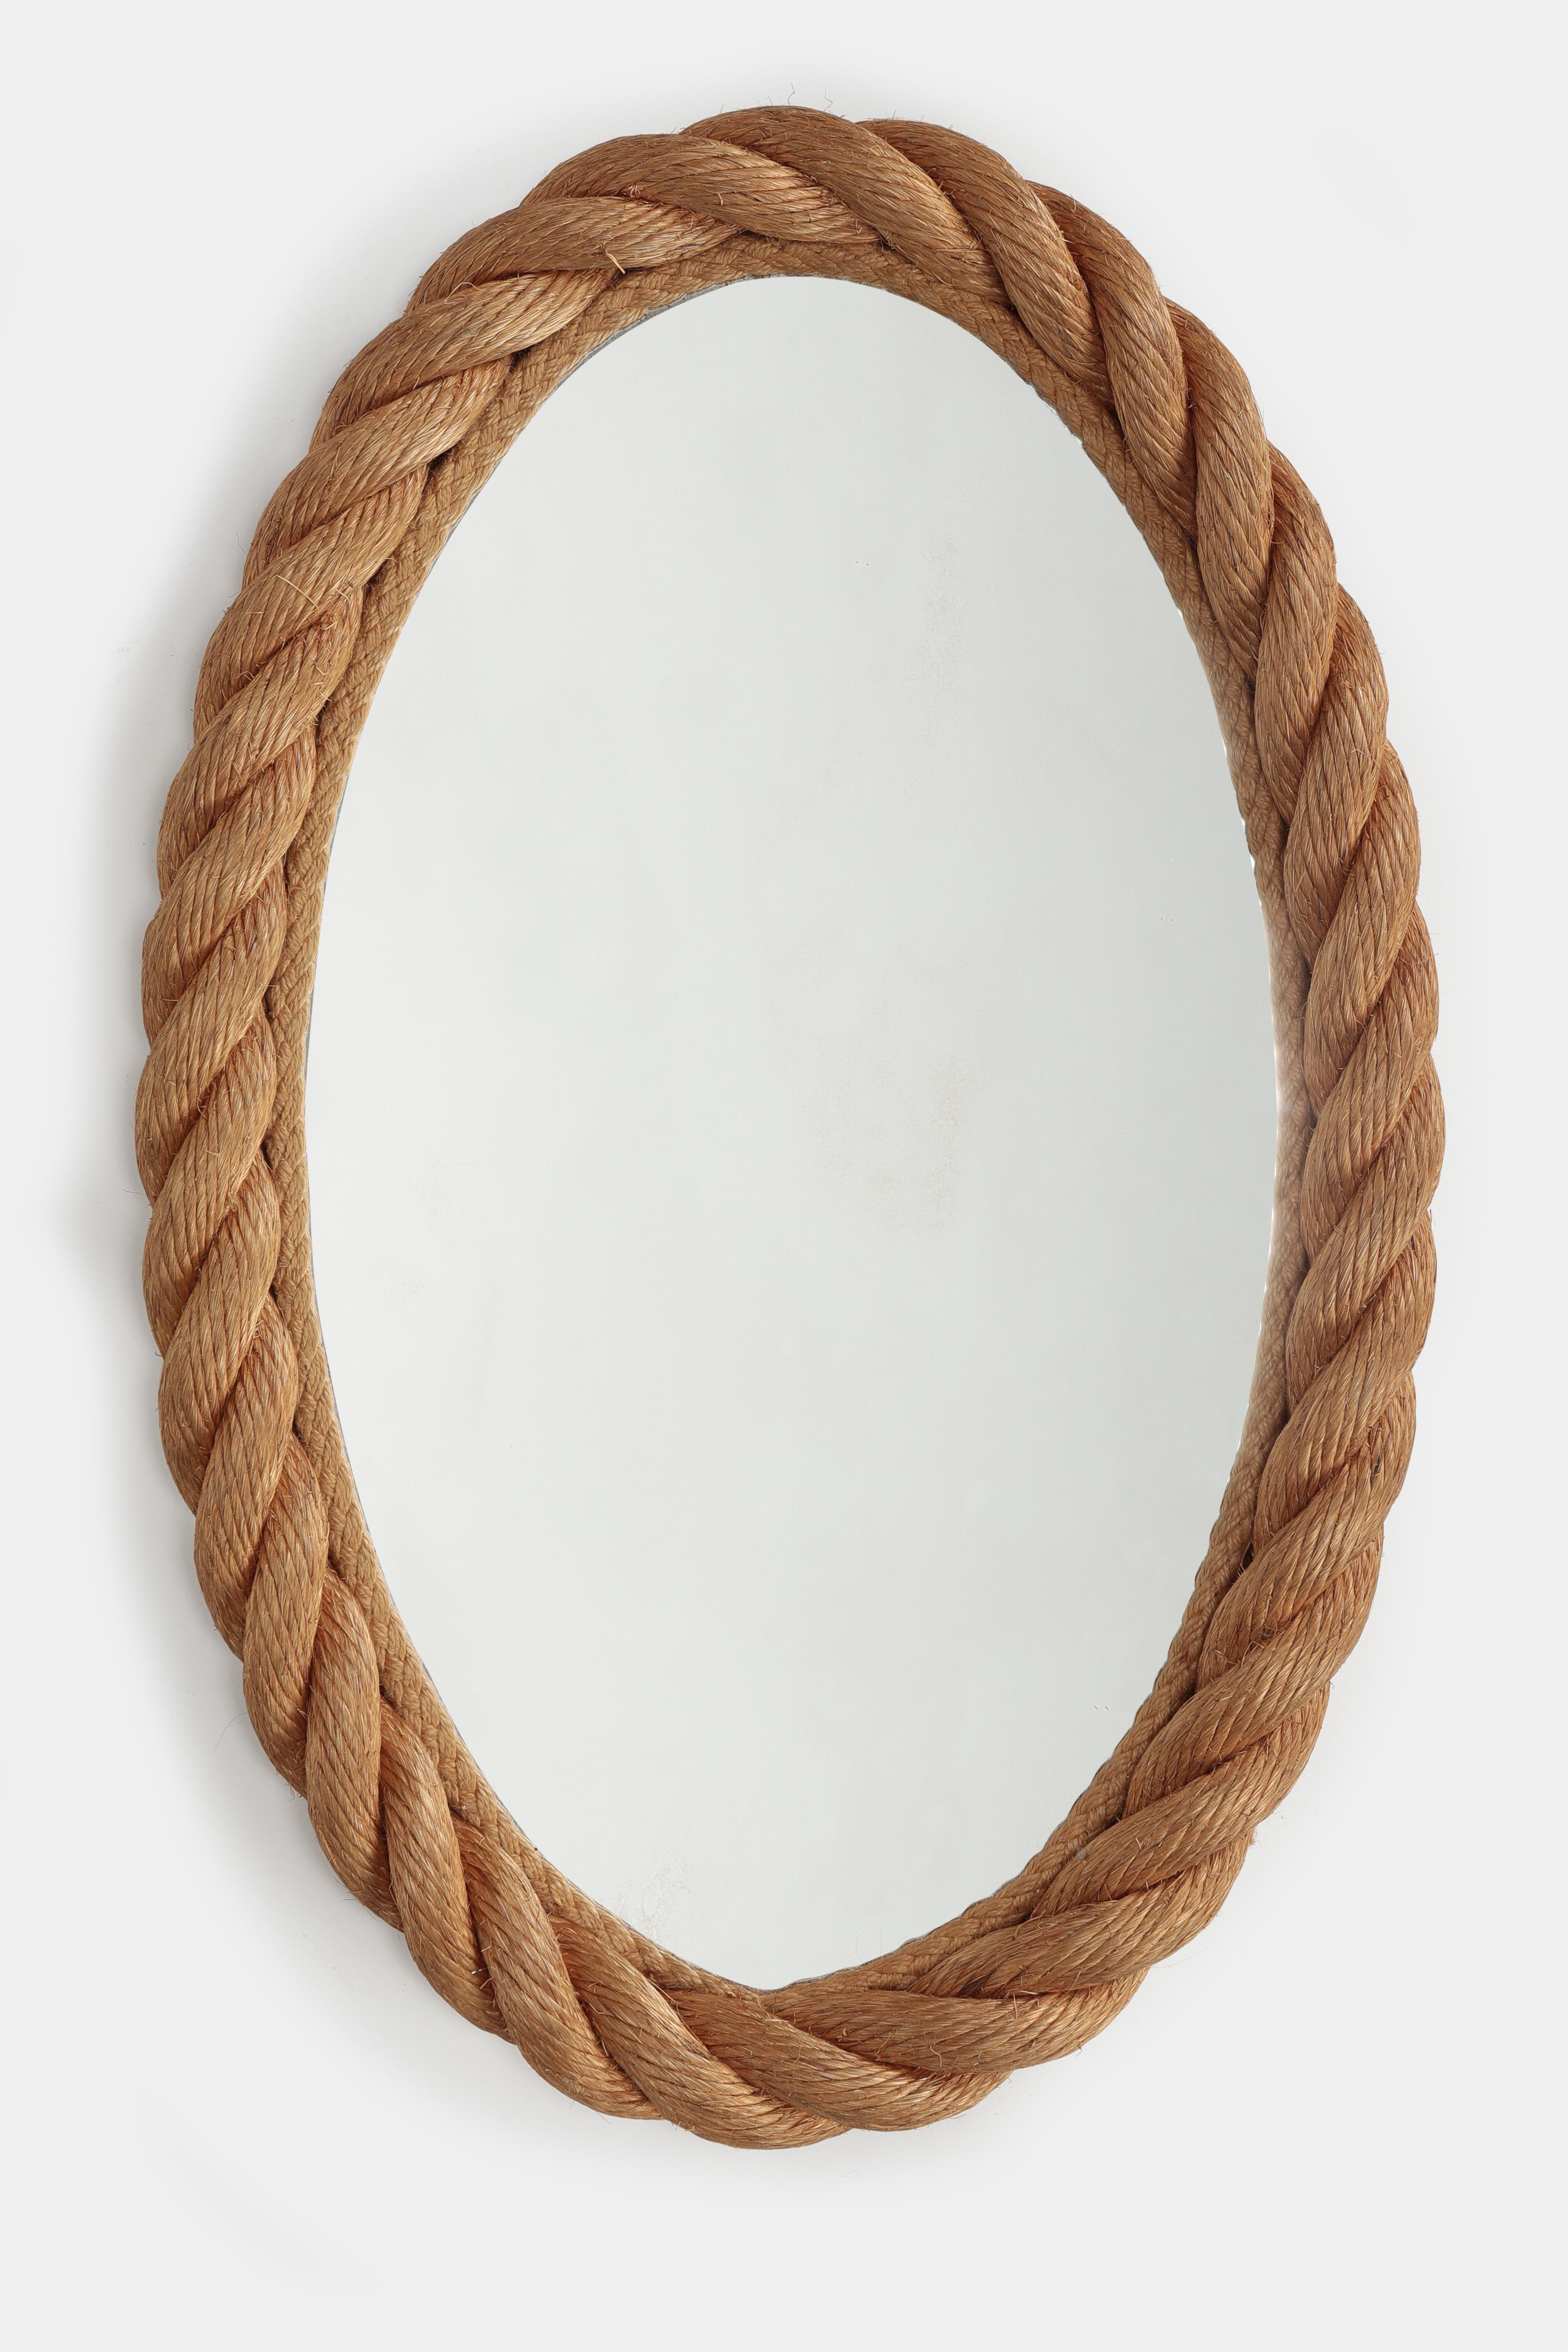 Adrien and Audoux wall mirror manufactured in the 1950s in France. Oval mirror glass surrounded by a braided rope.